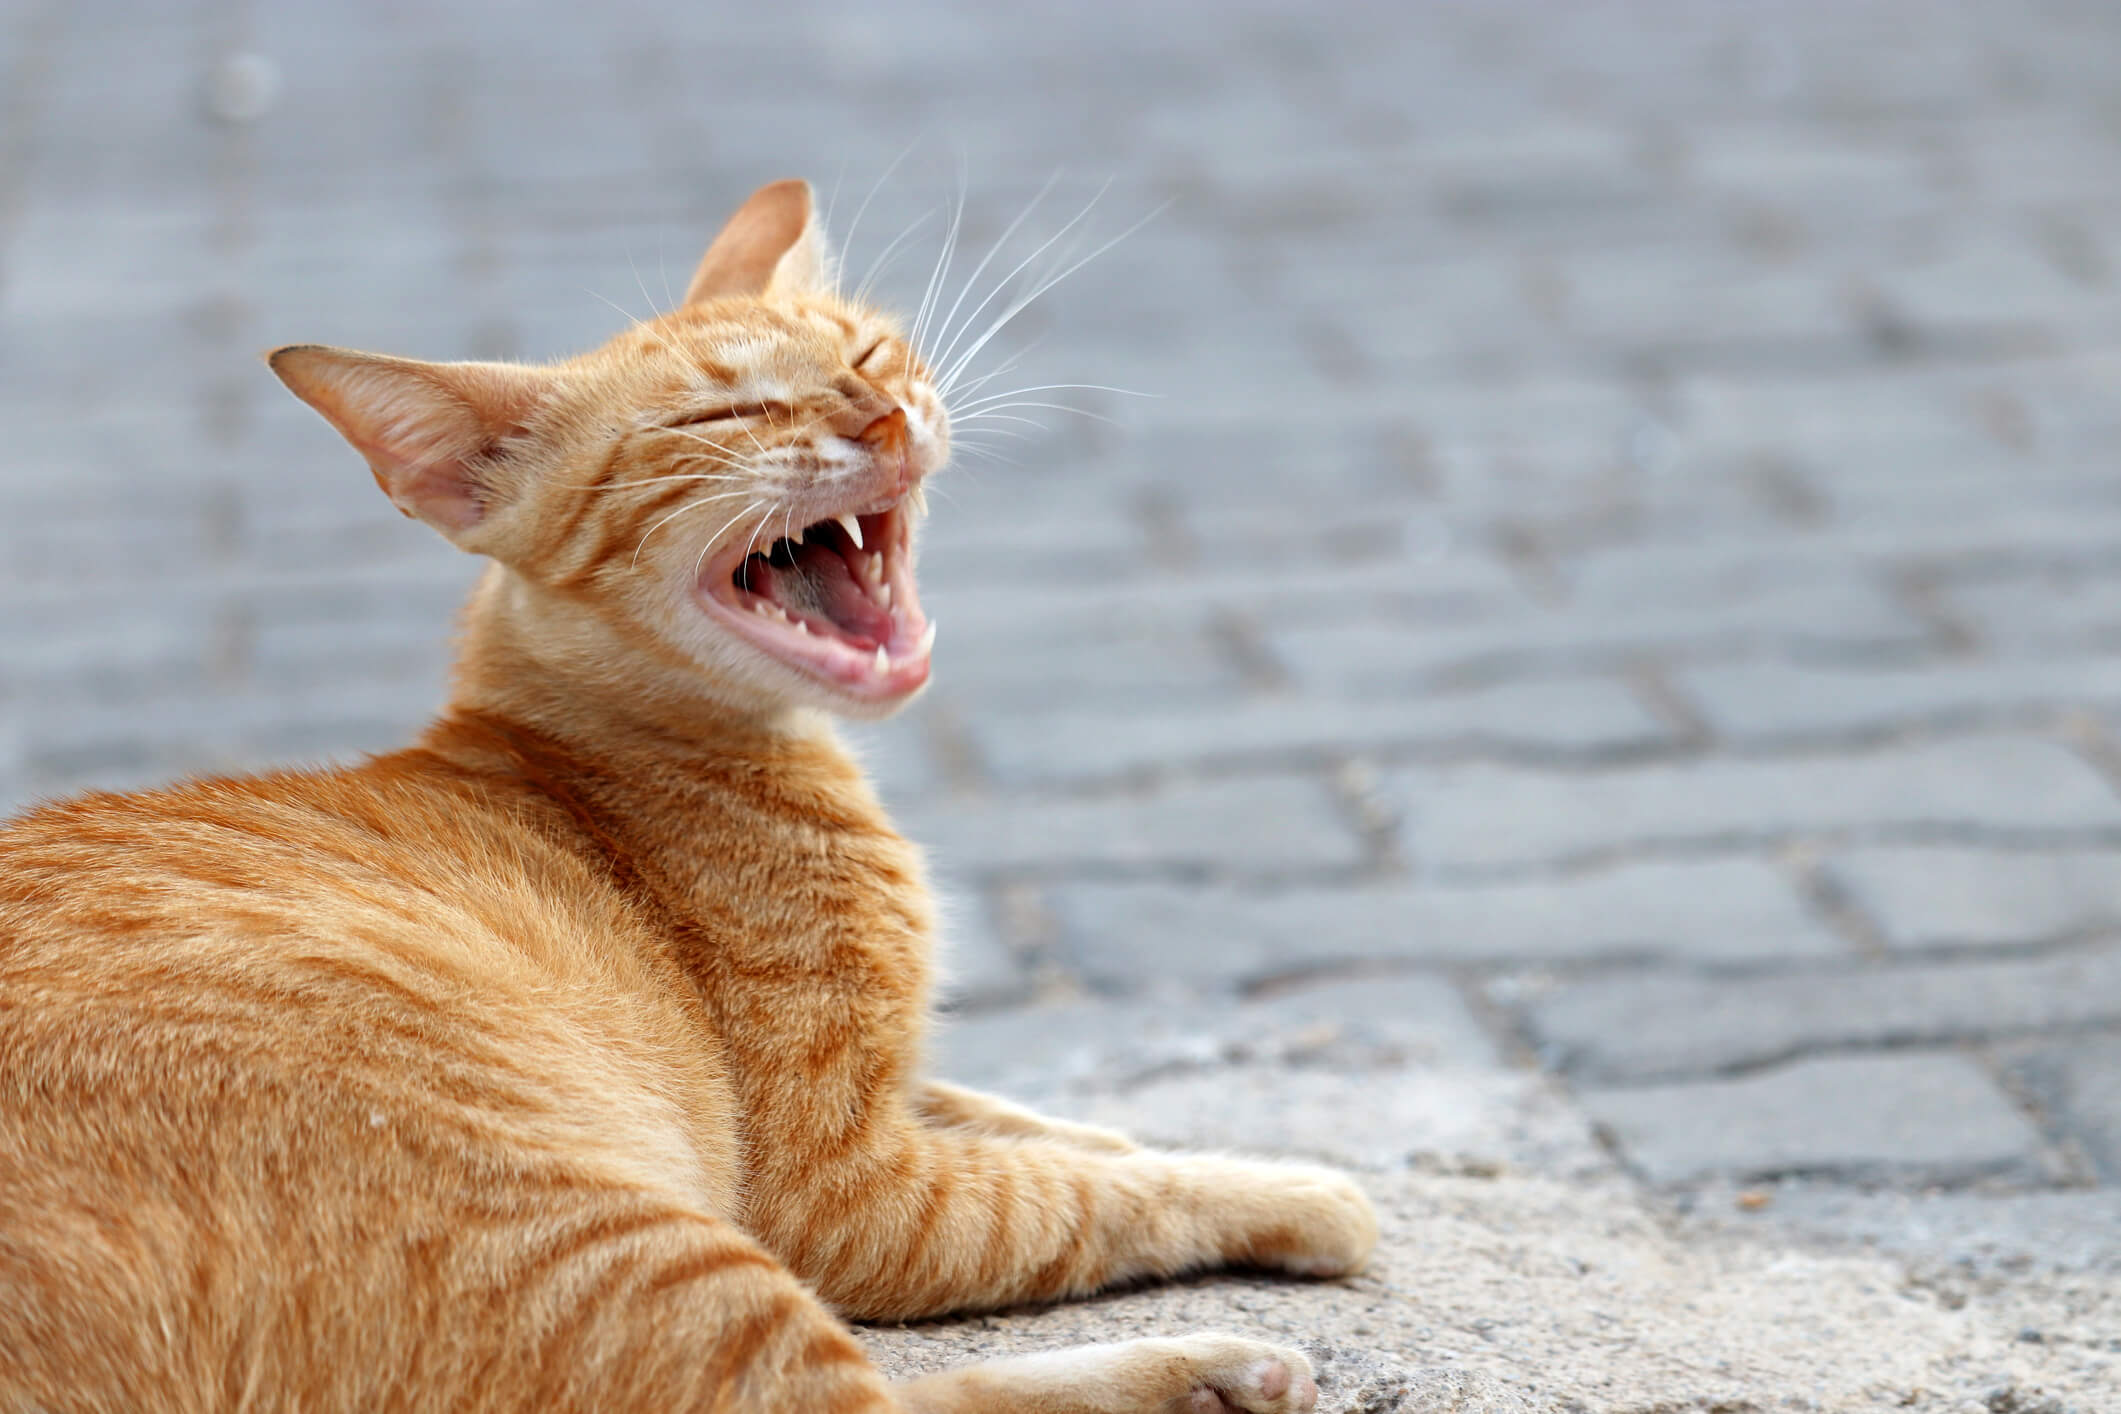 What to Make of Your Cats Repetitive Sneezing